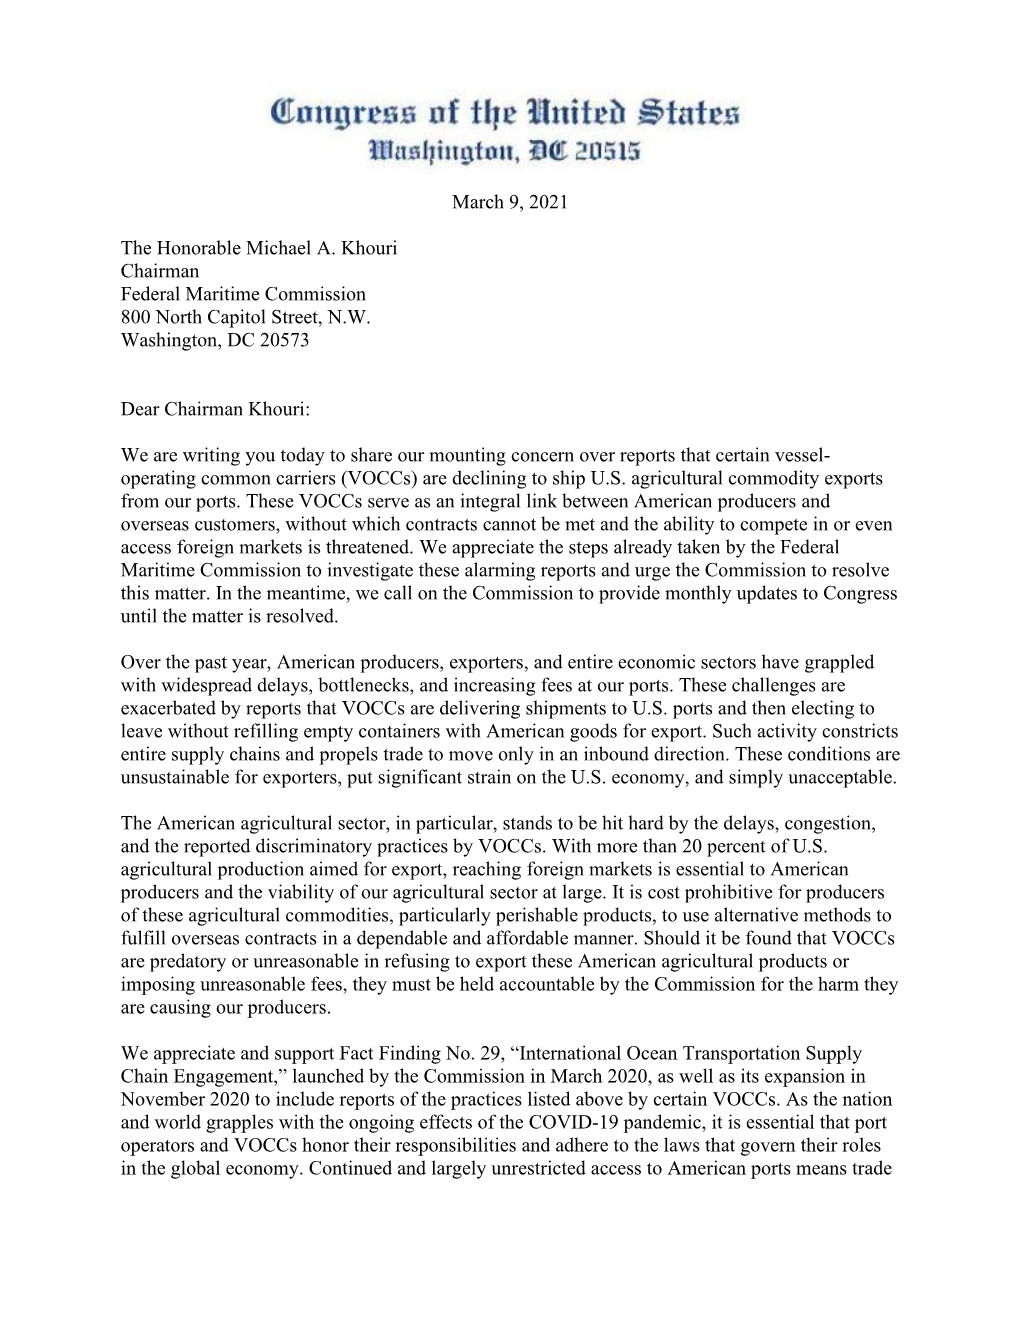 Congressional Letter to FMC Chairman Khouri